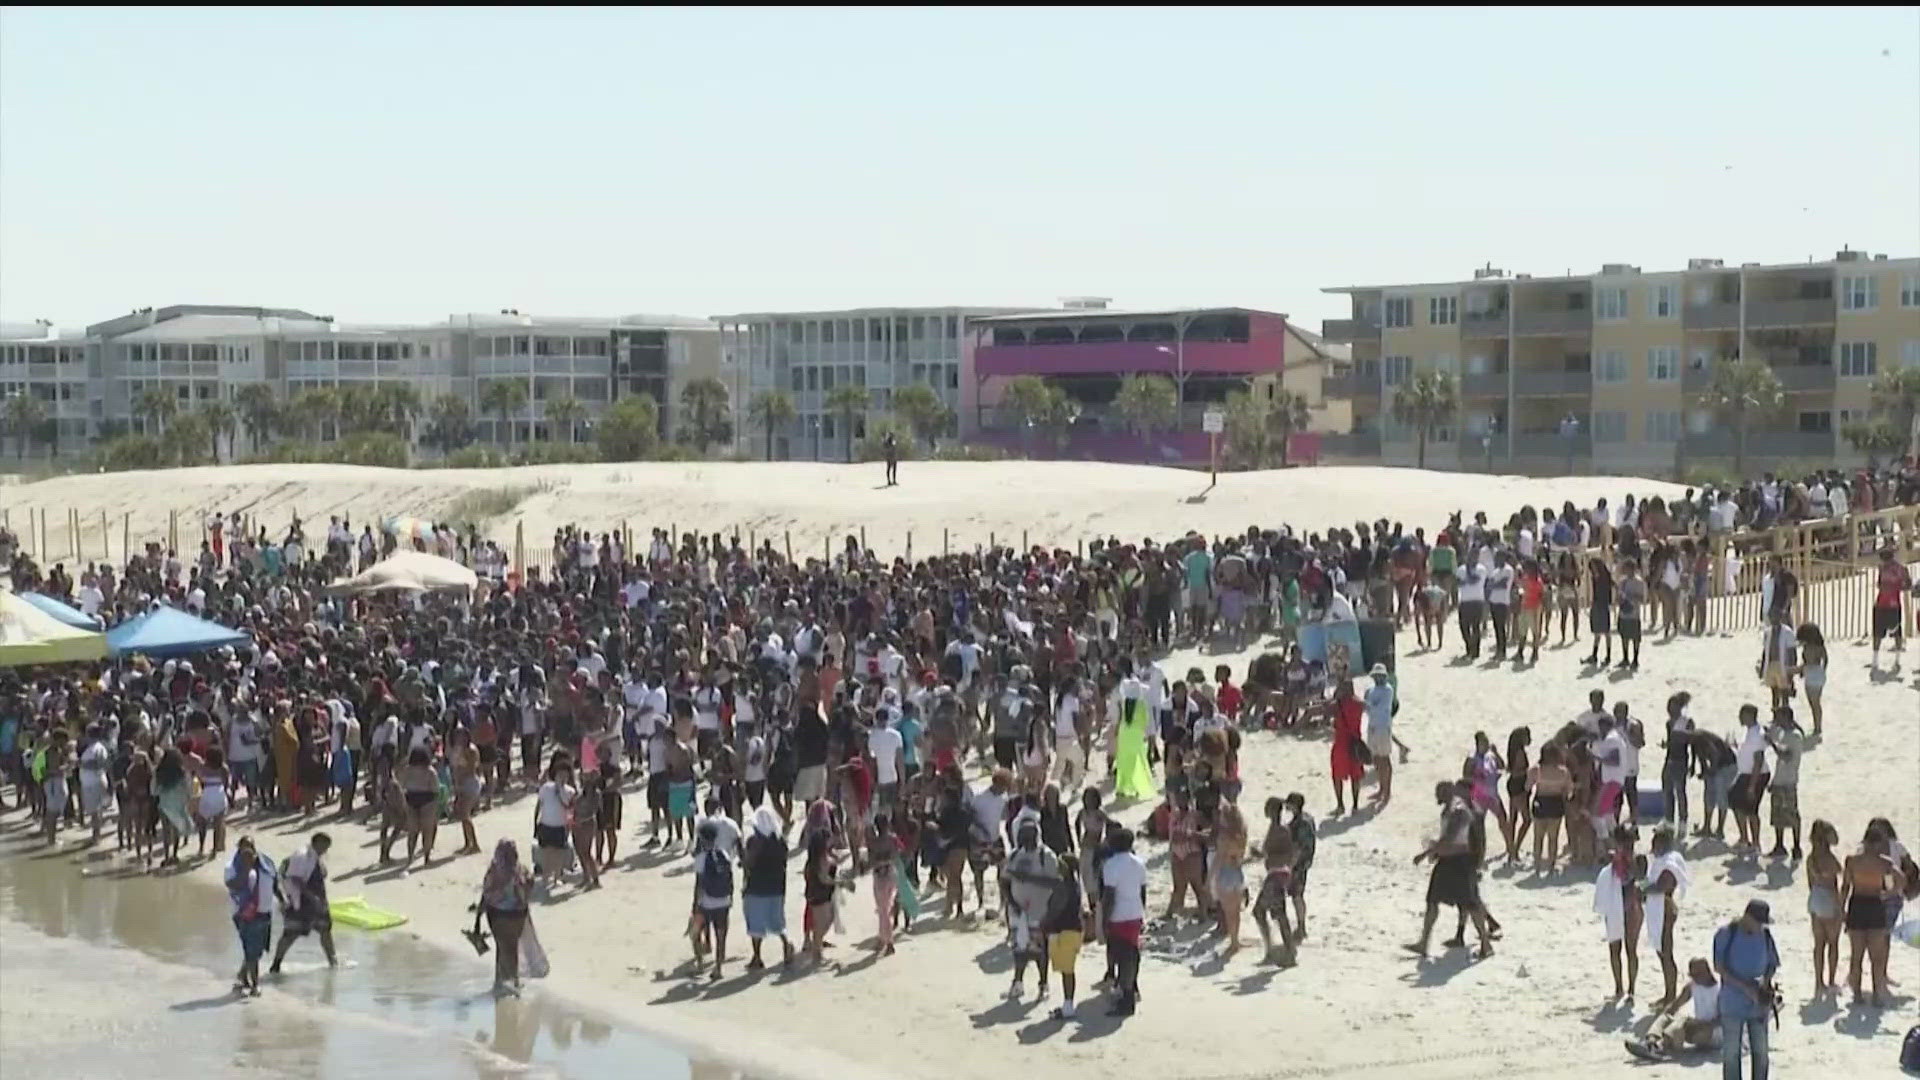 Thousands of HBCU flocked to Tybee Island over the weekend for the unpermitted event.